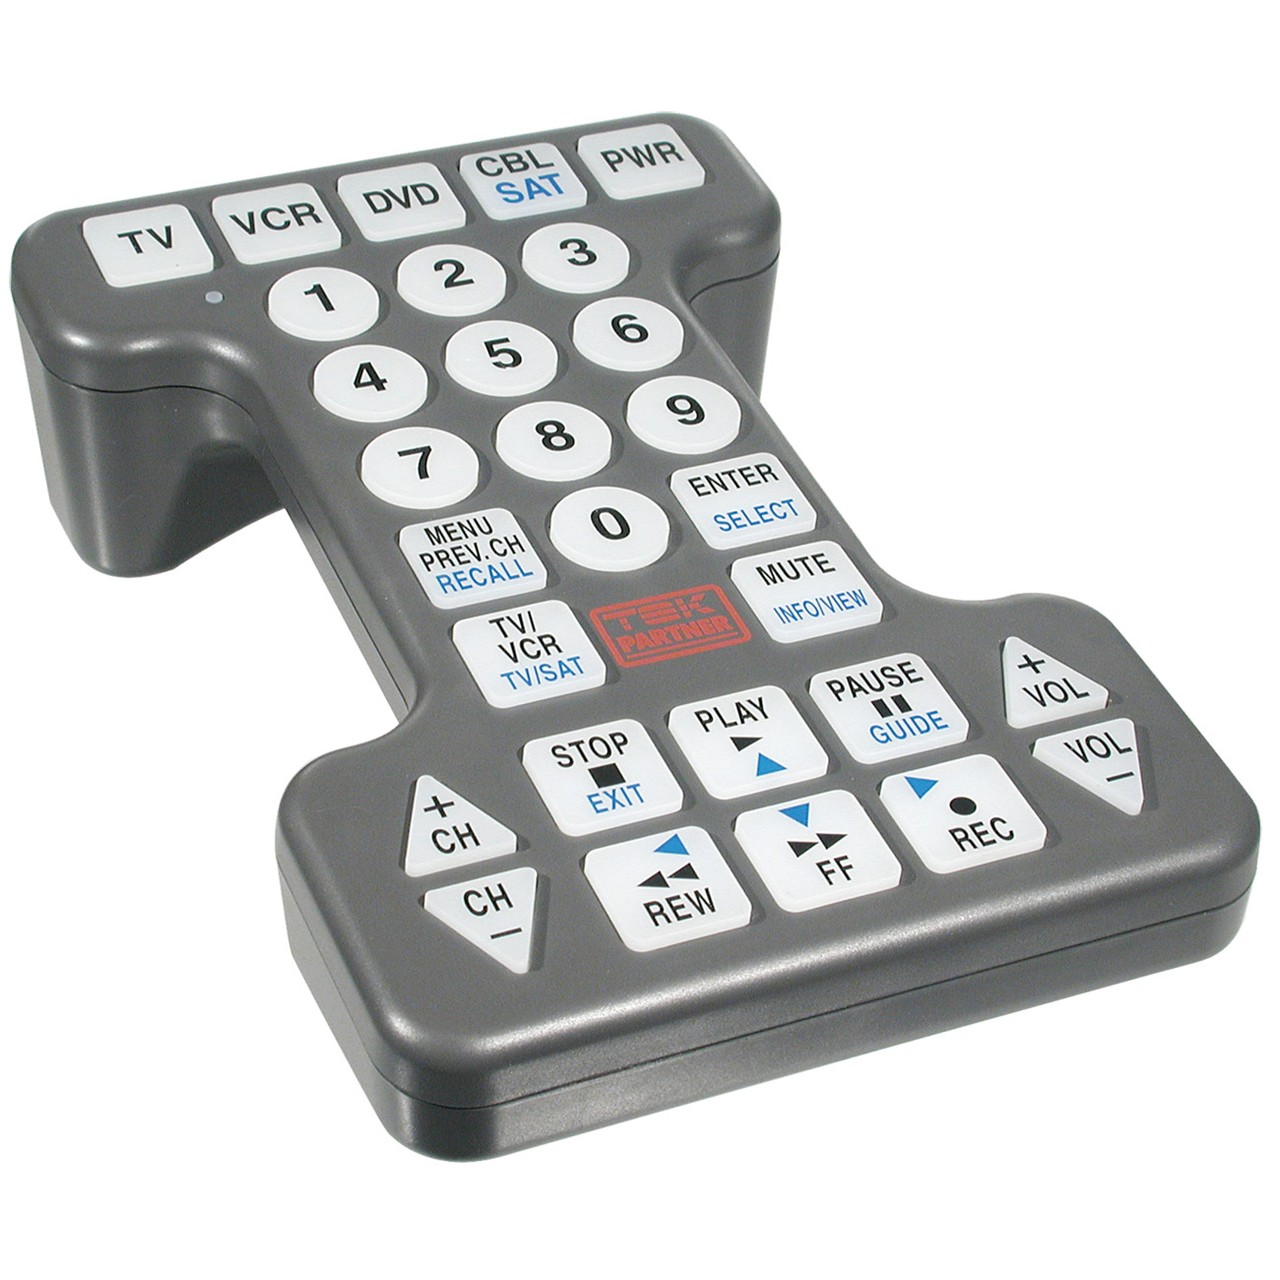 Oversized Universal Remote Control By Maxiaids